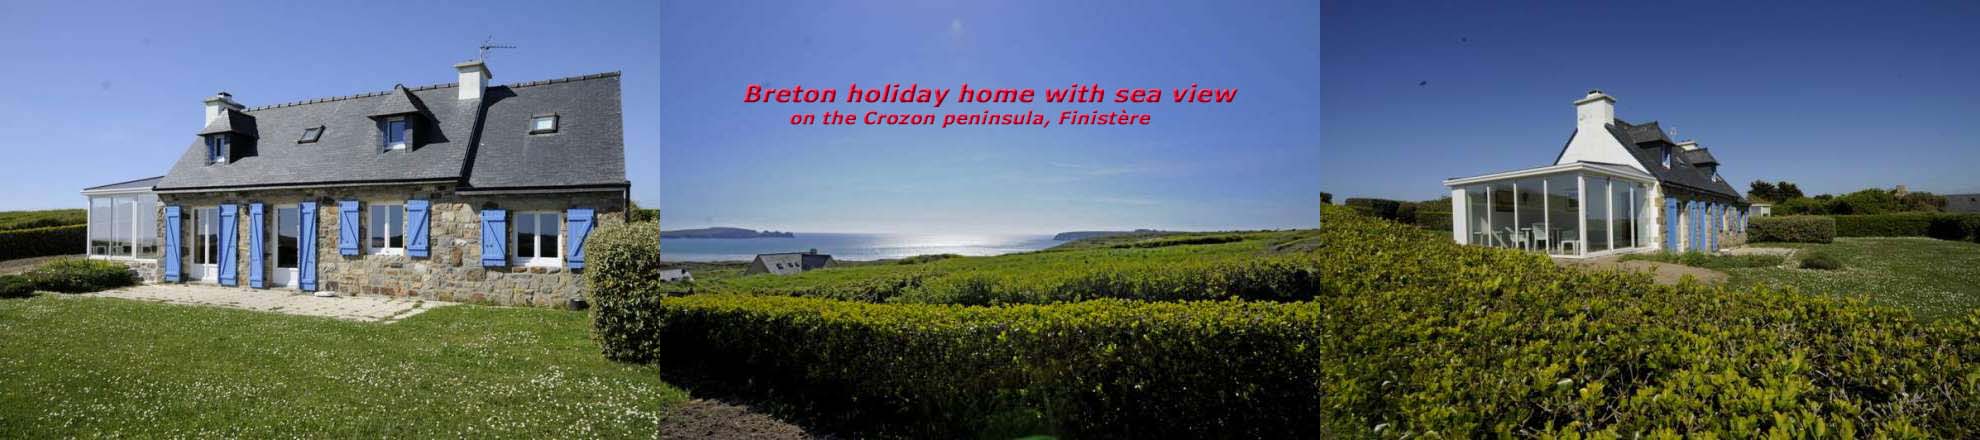 Brittany Holiday-home with sea view: Cottage Gérard Kersiguenou on the Crozon peninsula